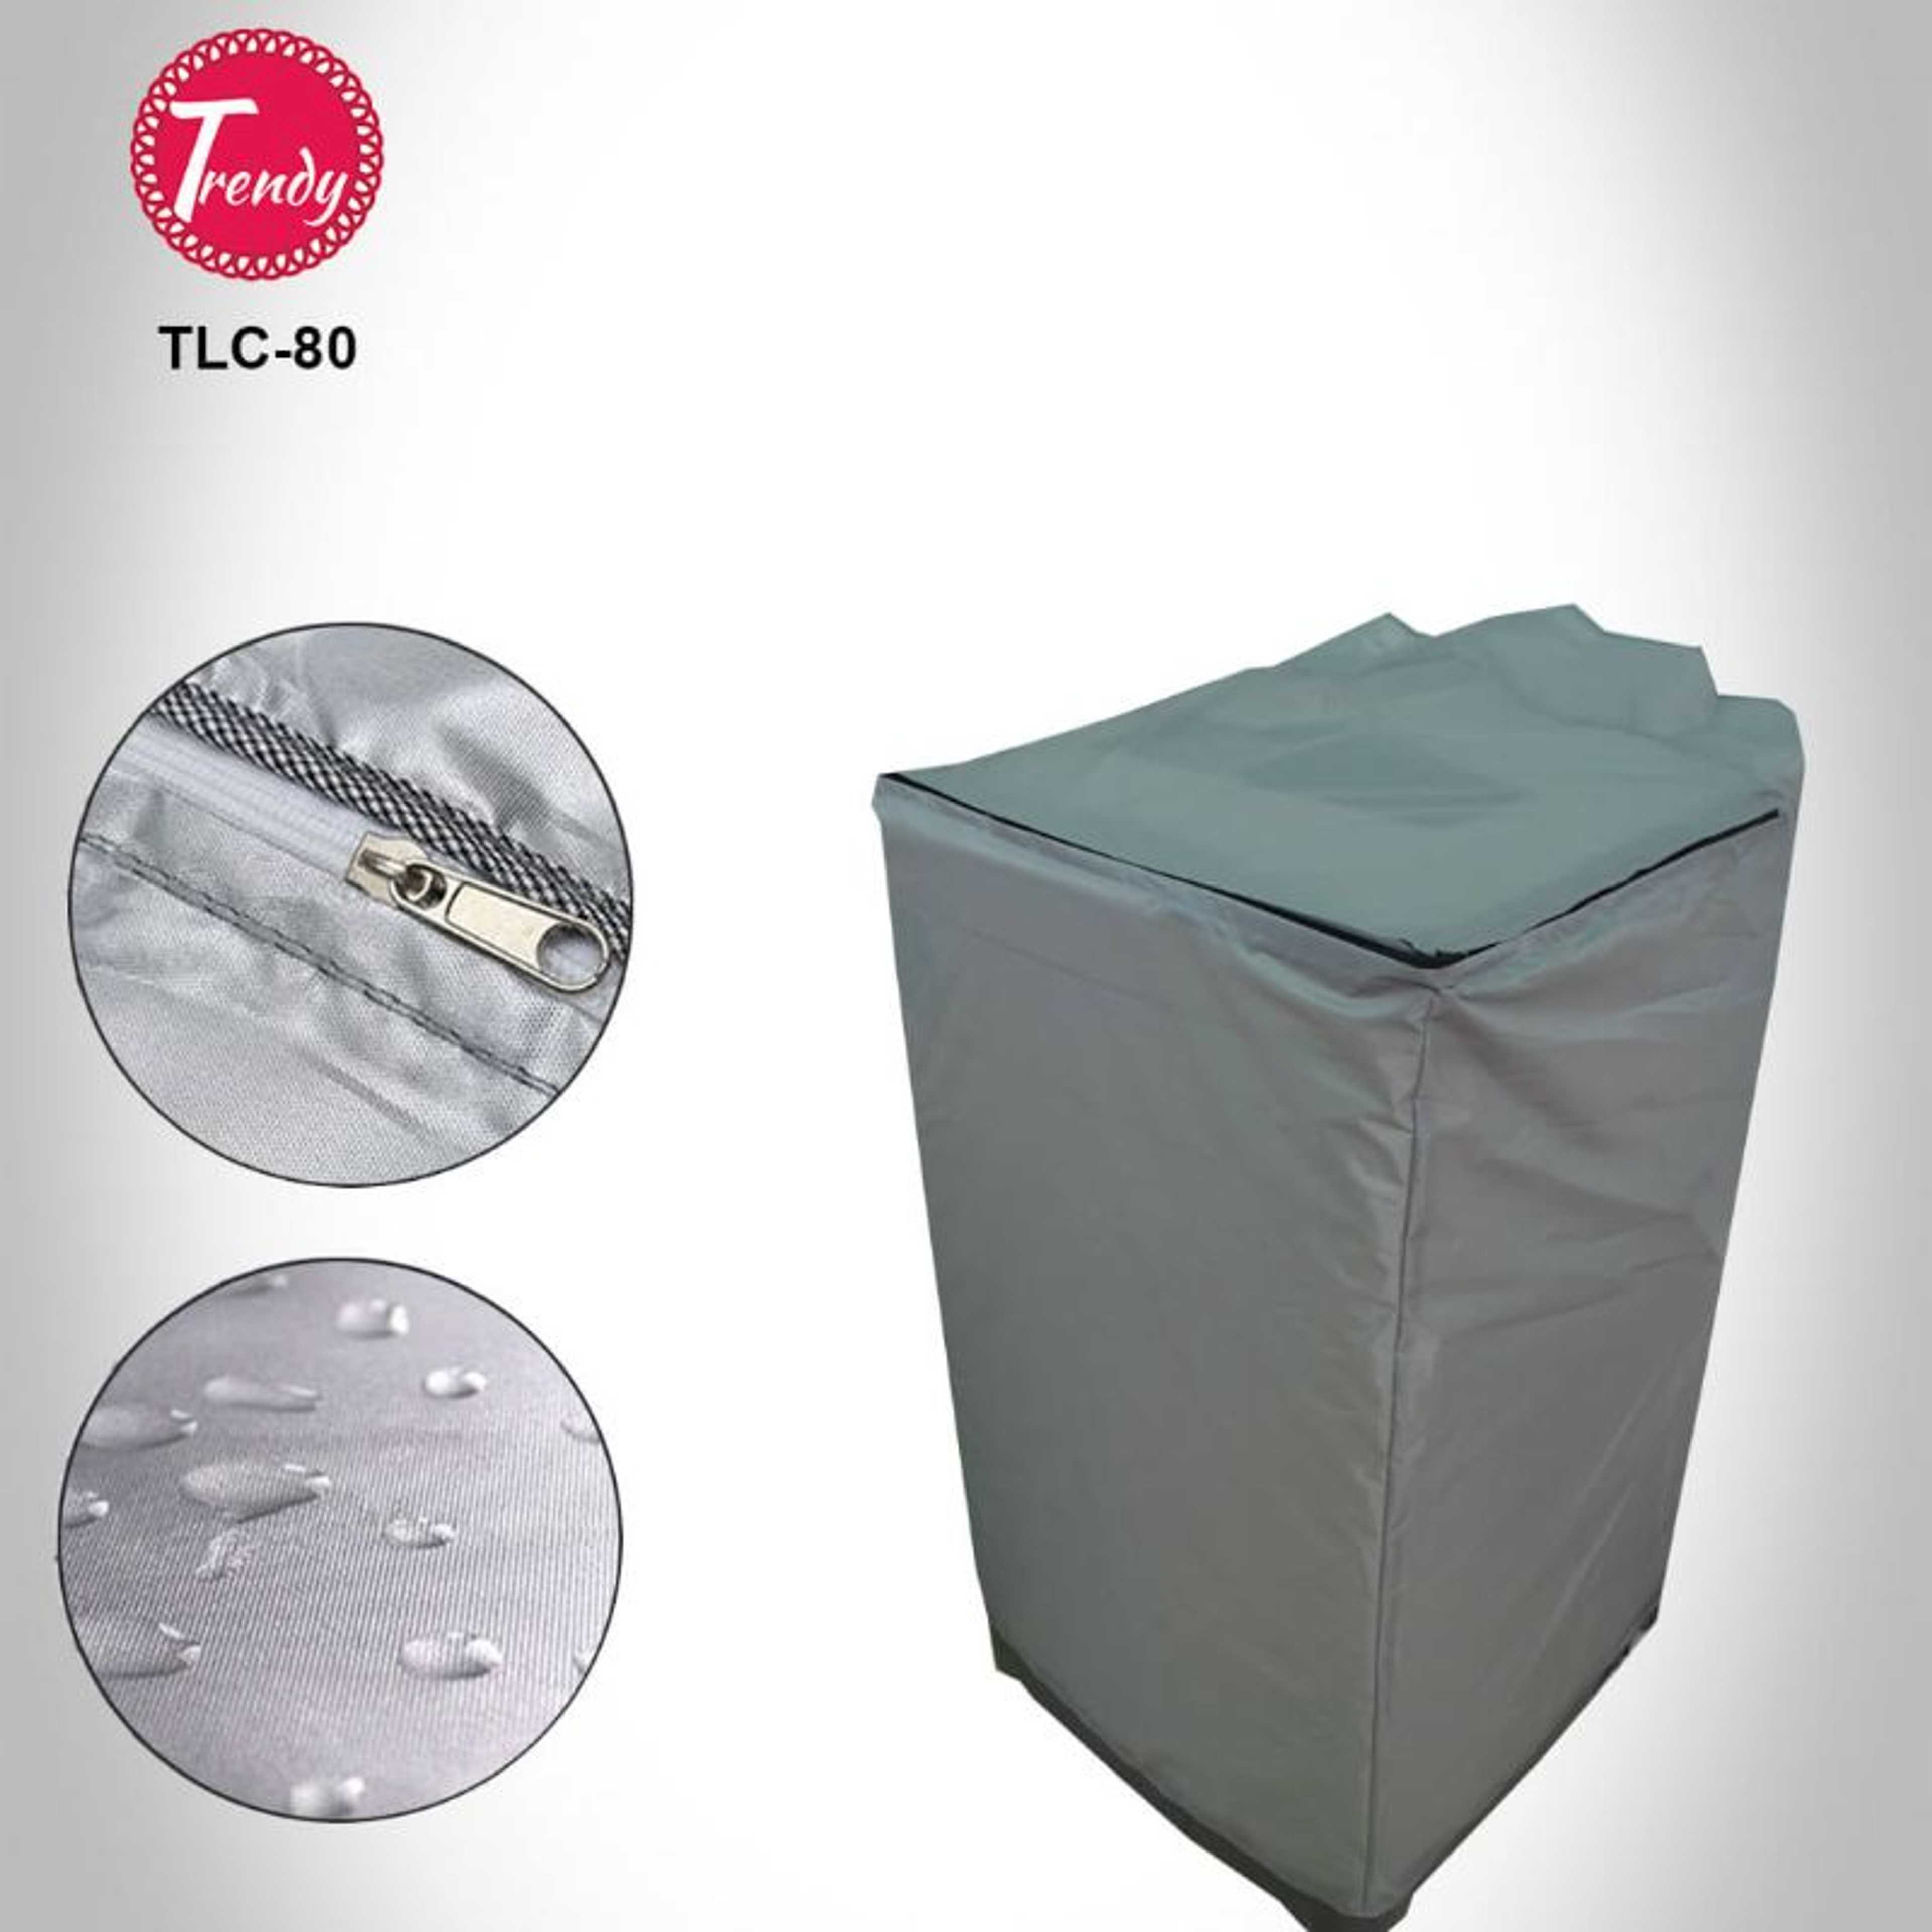 Top Load Washing Machine Cover Protector TLC-80